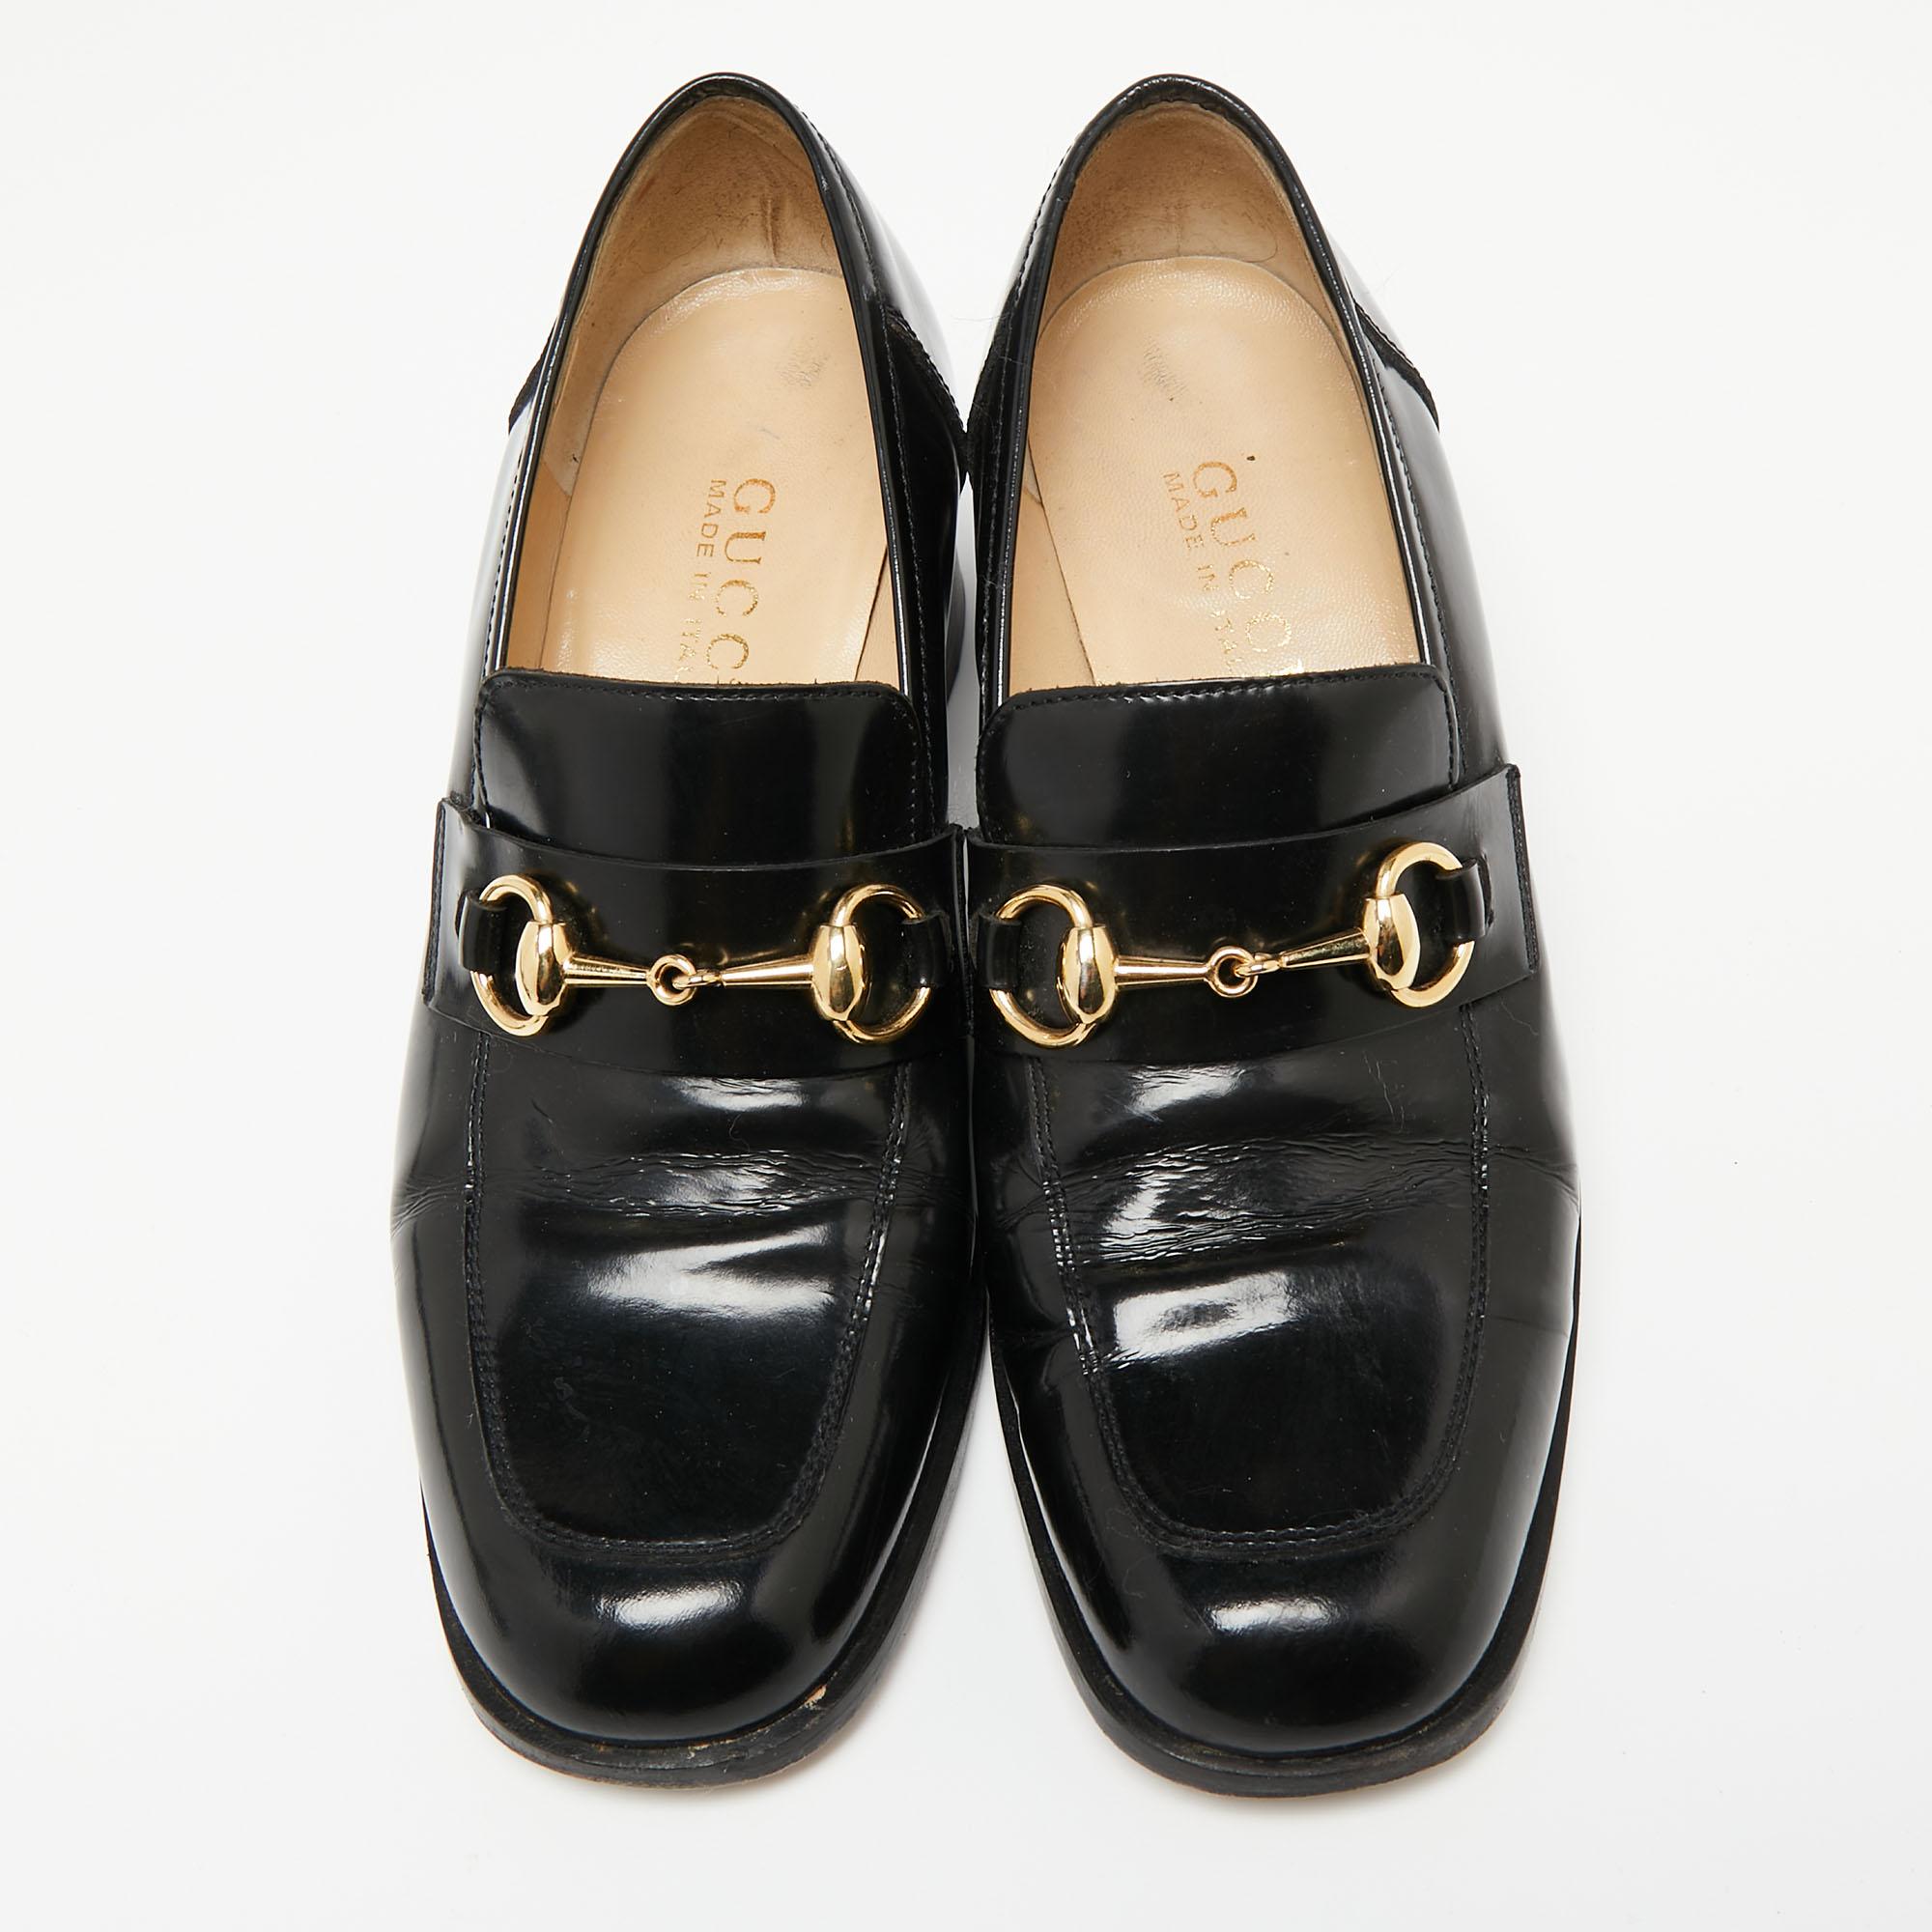 From the House of Gucci comes these classy loafer pumps to elevate the look of your attire. They are crafted using black leather, with a gold-tone Horsebit accent placed on the upper. They are completed in a slip-on manner and 5 cm block heels. Pair